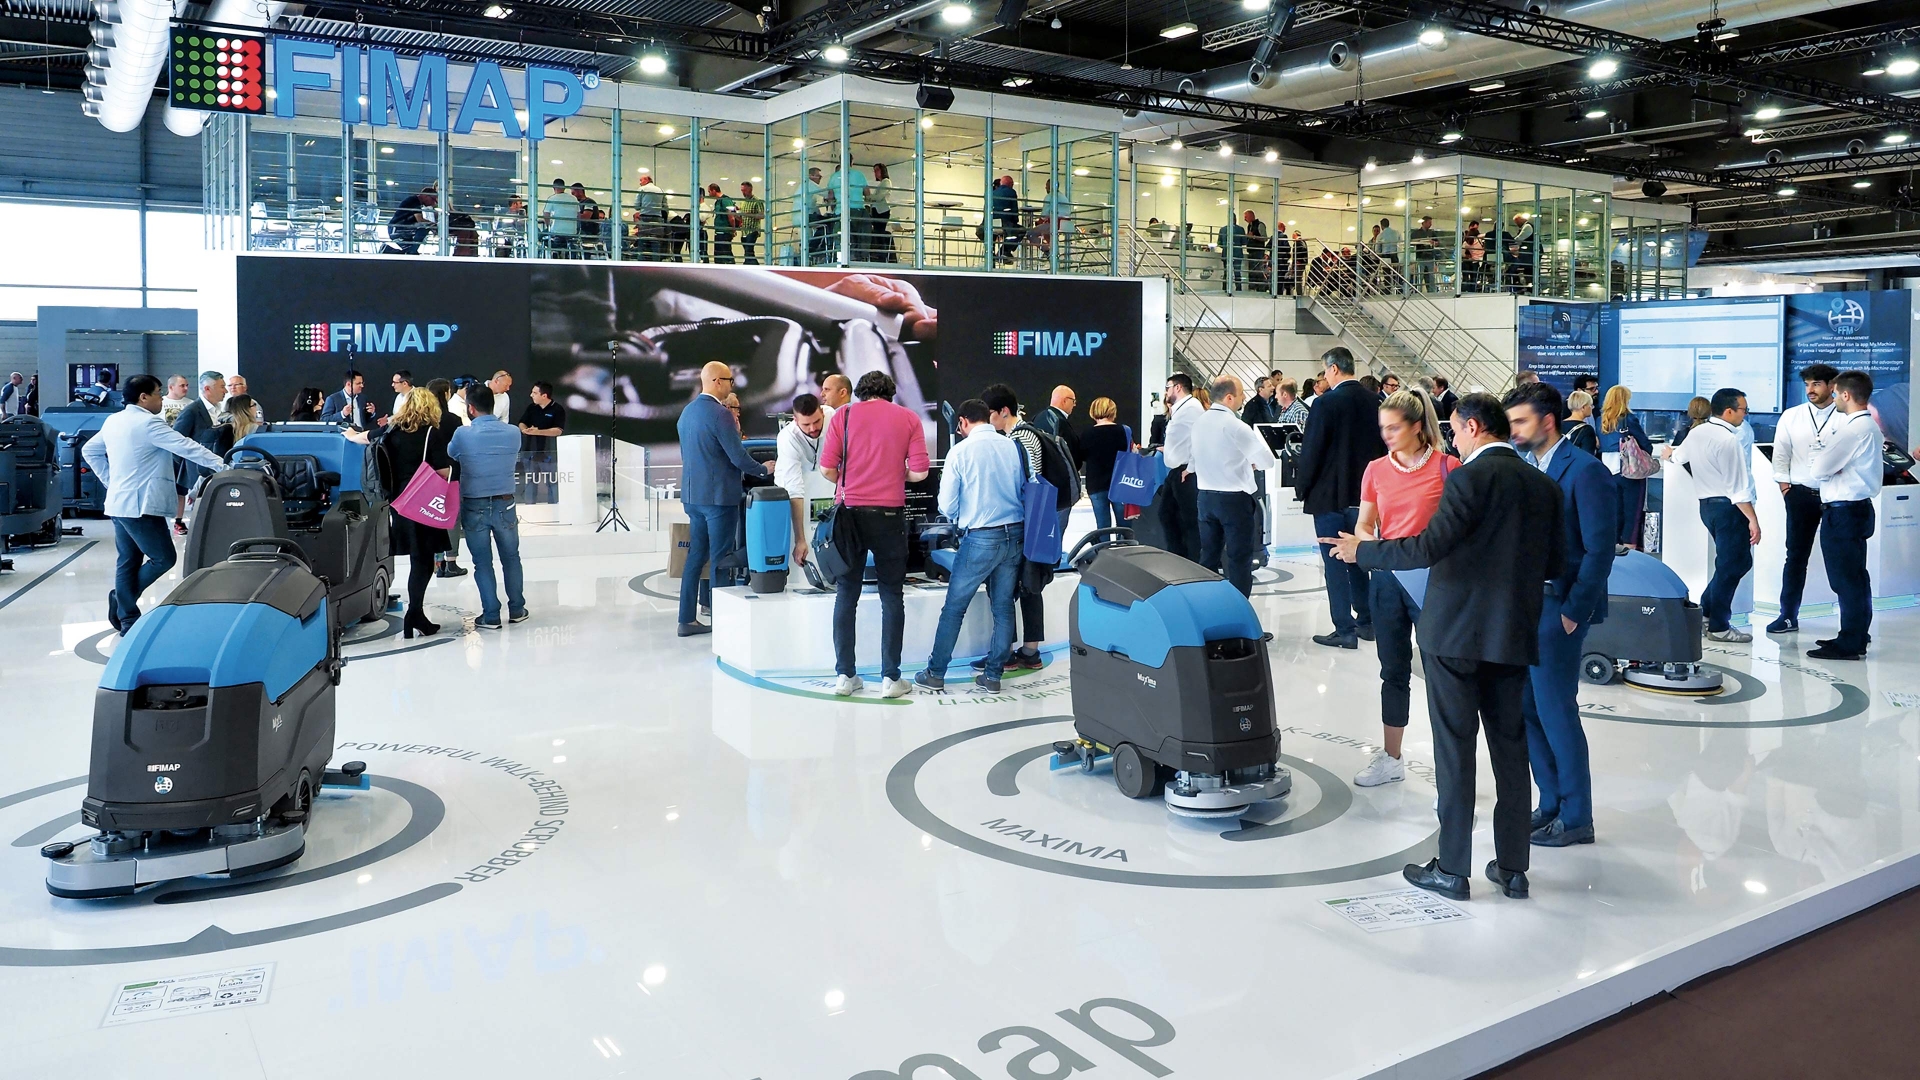 Fimap presents new products, 2.0 services and a virtual tour at Pulire 2019